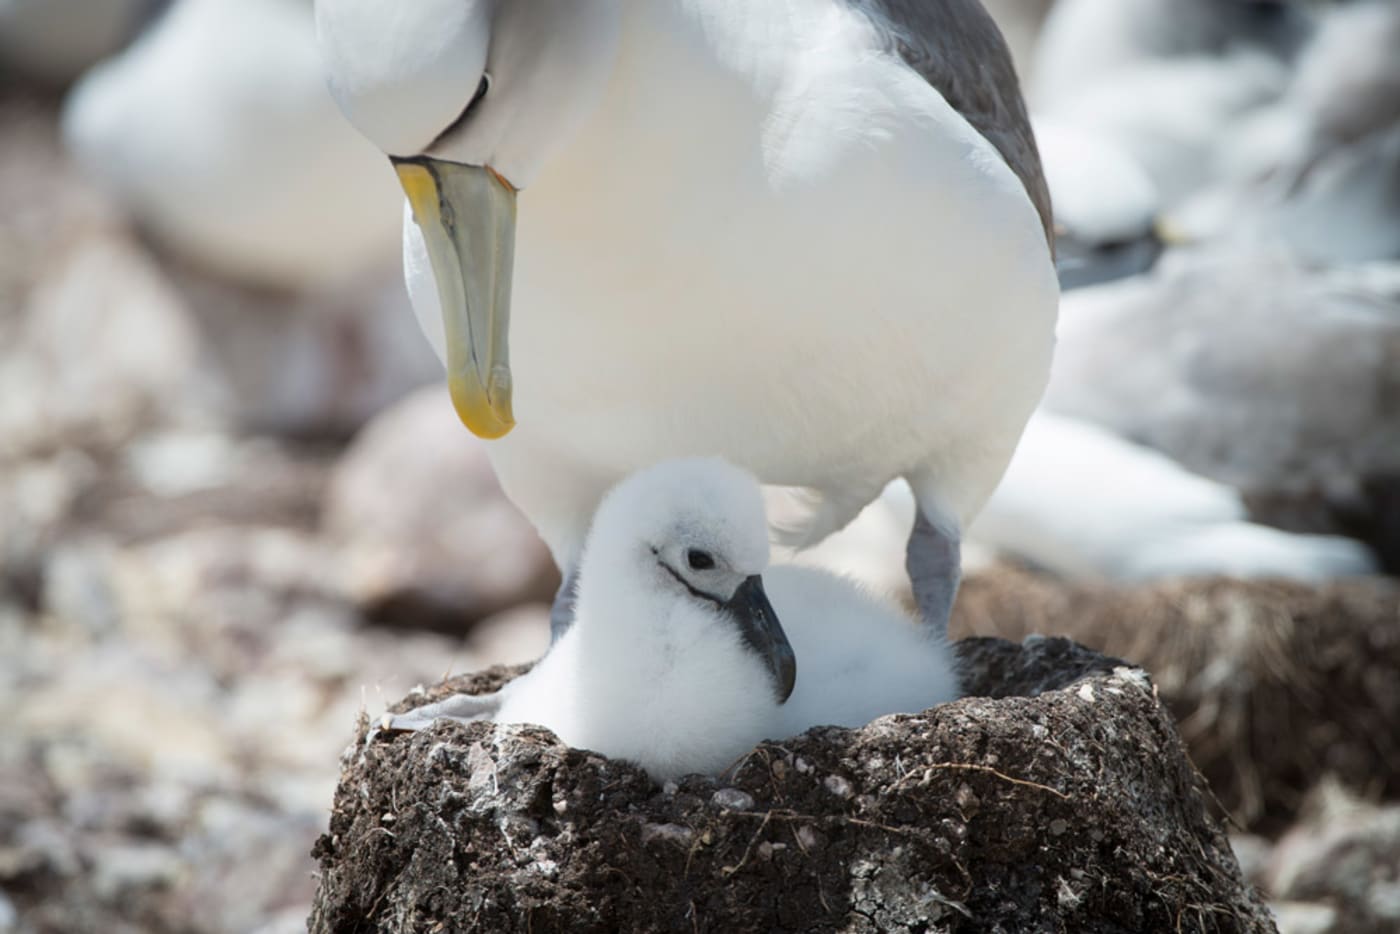 Shy albatross chick sitting in an artificial nest with parent